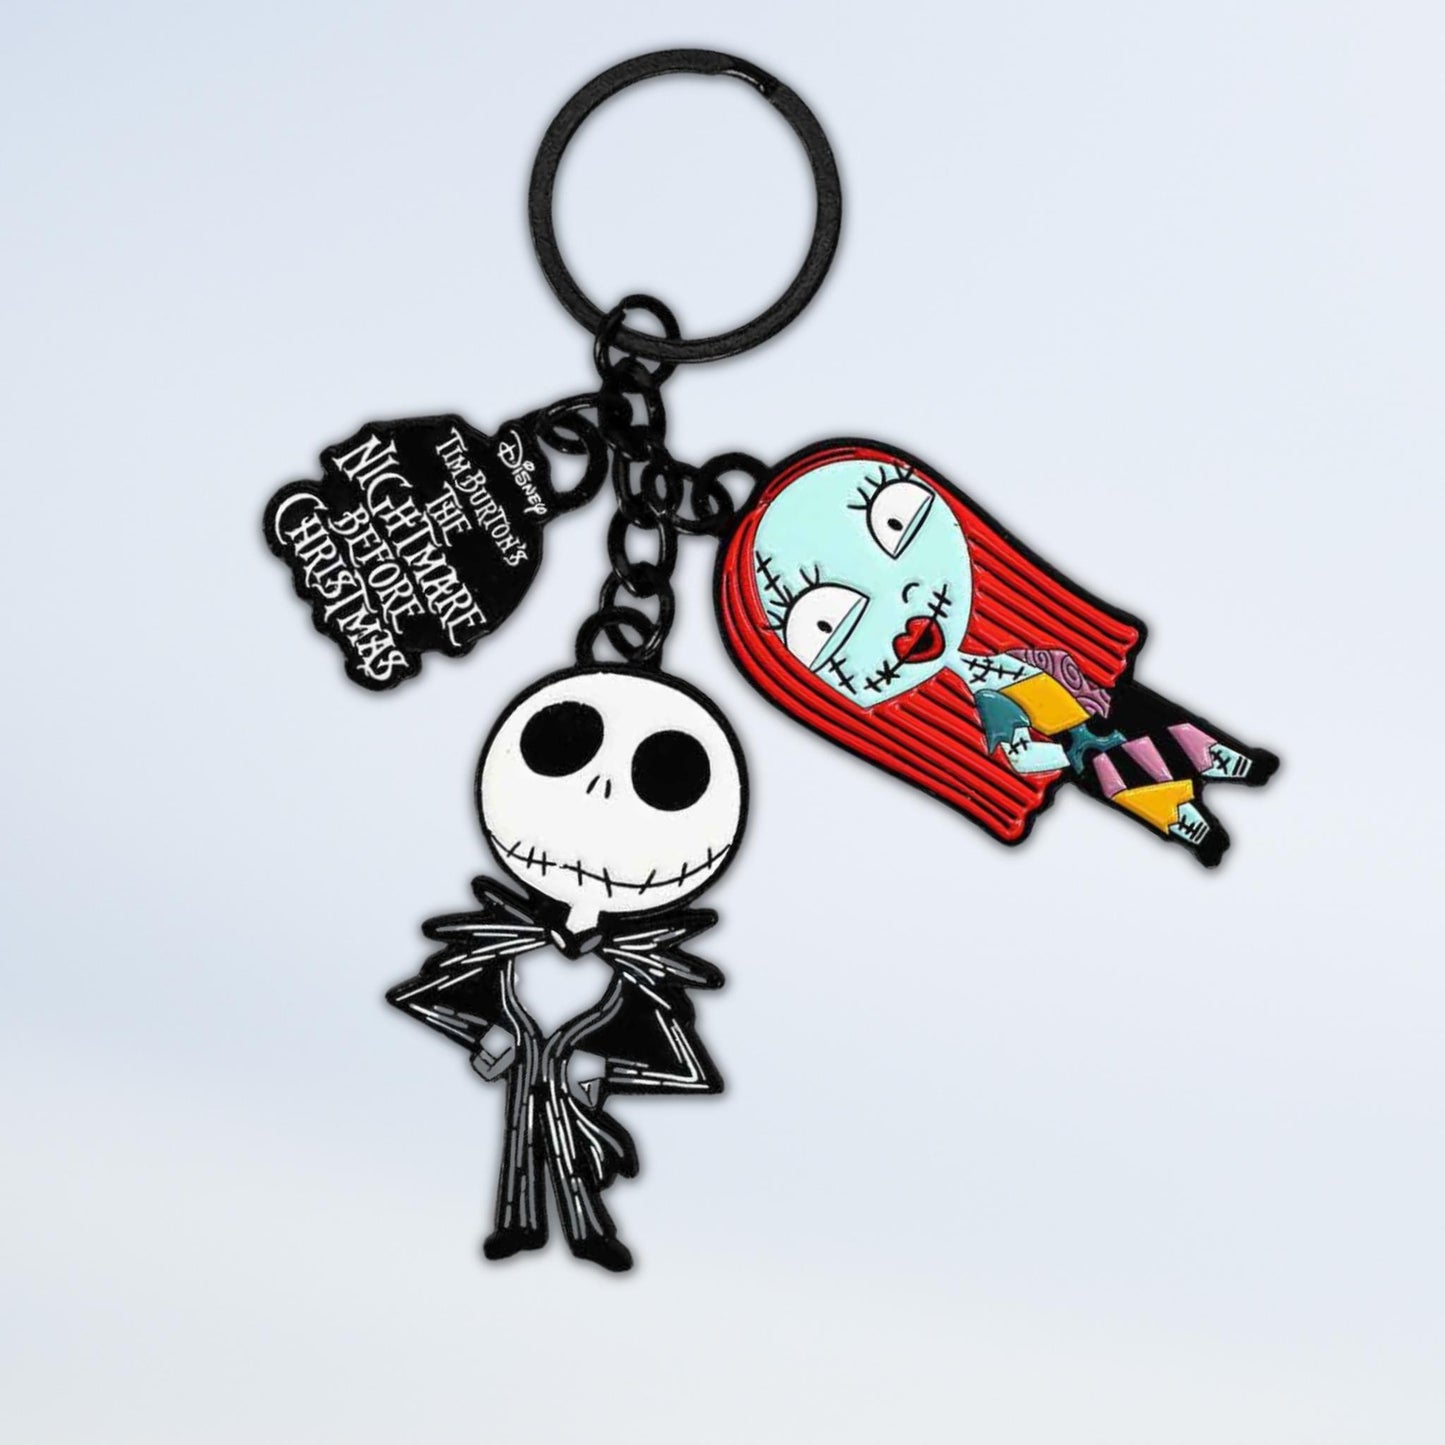 Jack and Sally Keychain Cartoon Character Wristlet Key Chain Ring Keys  Holder Scary Christmas Gift For Fans